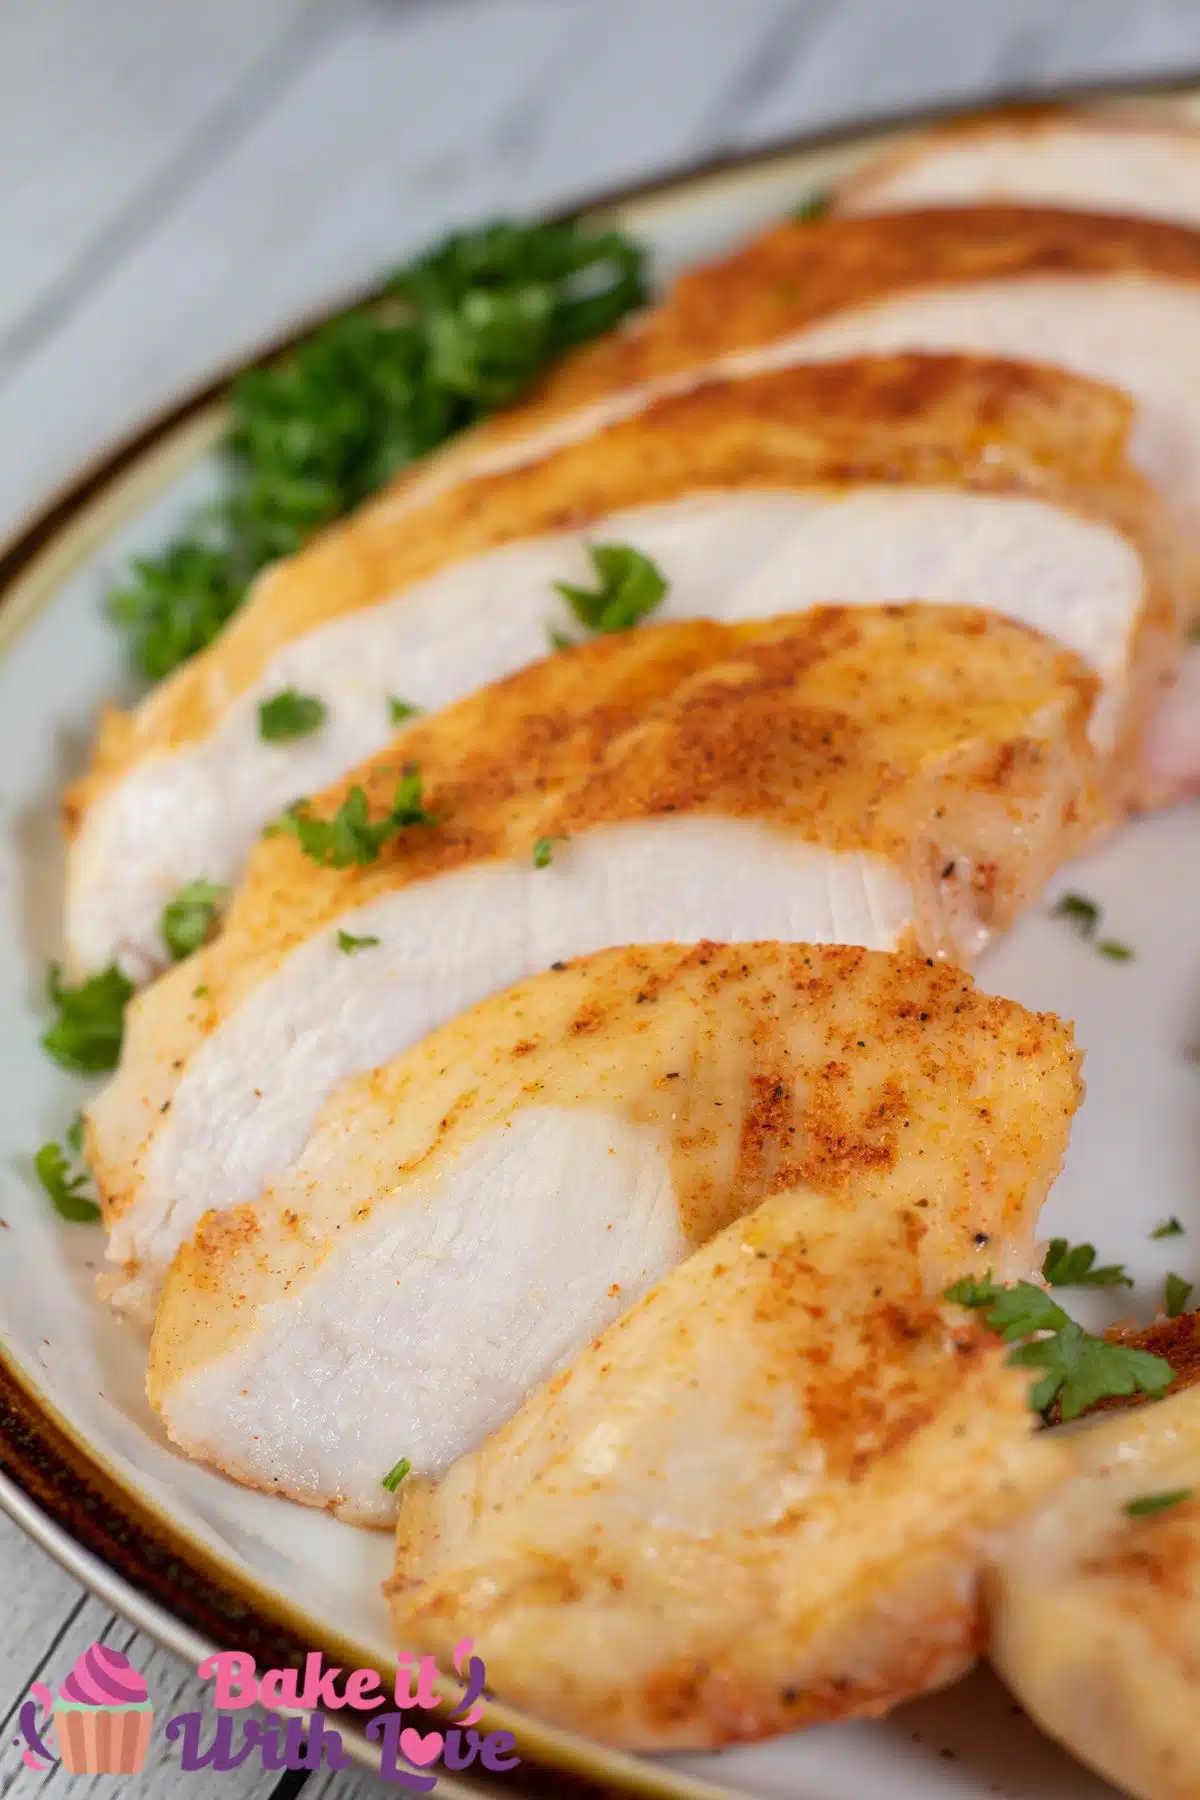 Tall image showing sliced sous vide boneless skinless chicken breast.